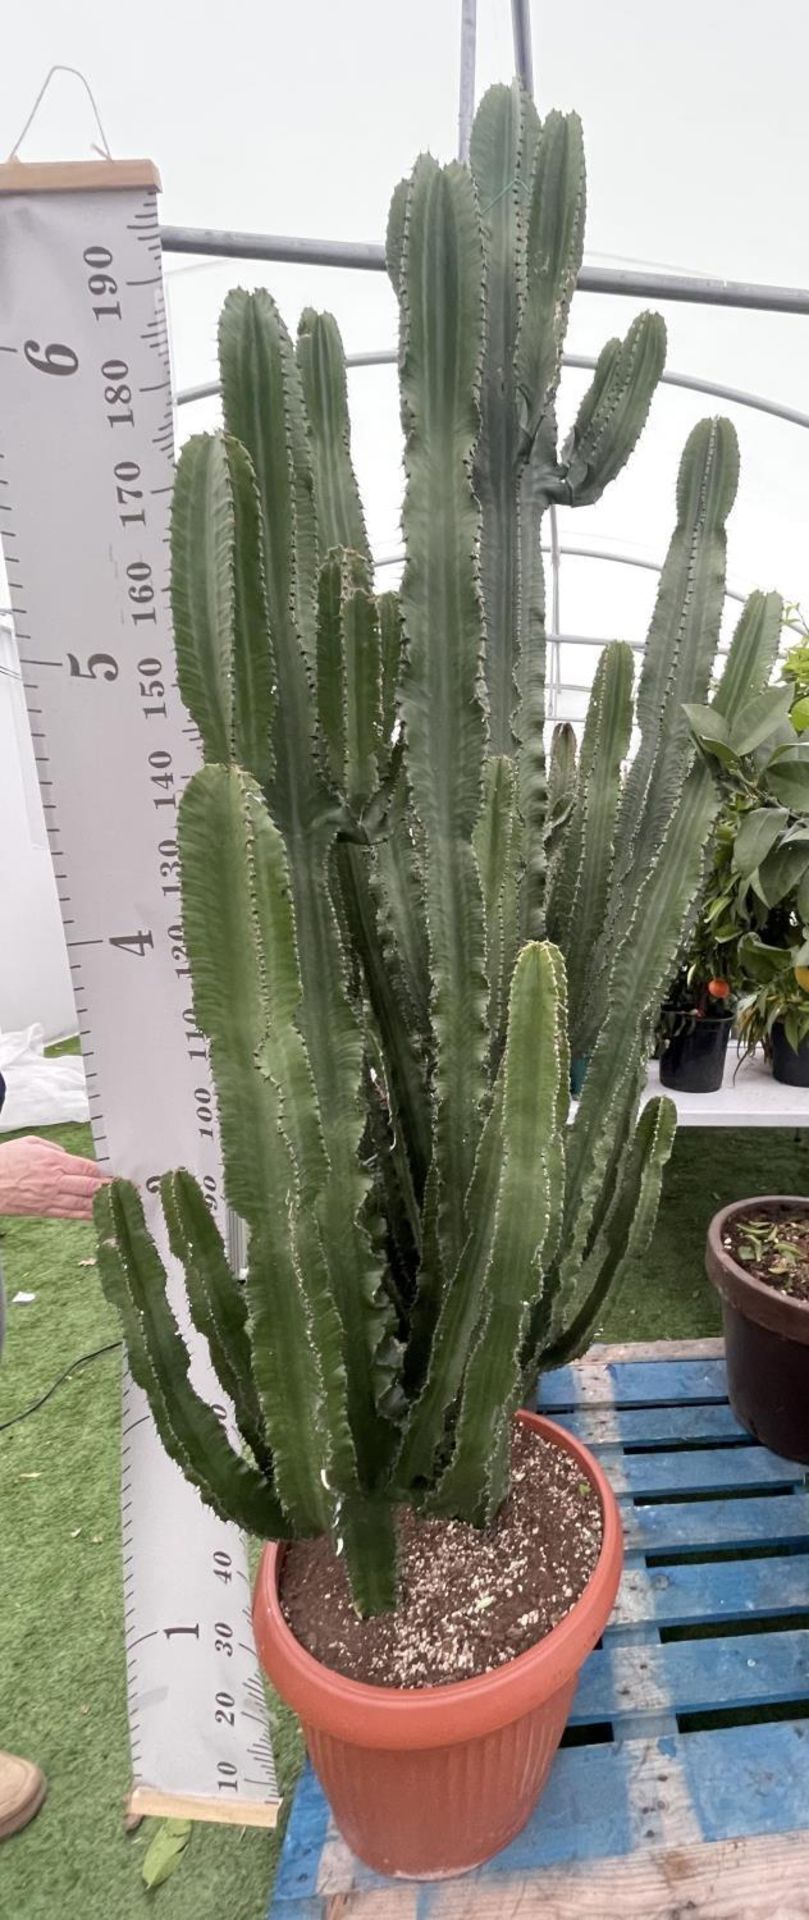 A LARGE EUPHORBIA ERYTREA CANDELABRUM CACTUS PLANT OVER 250CM TALL IN A 3O LITRE POT + VAT - Image 5 of 5